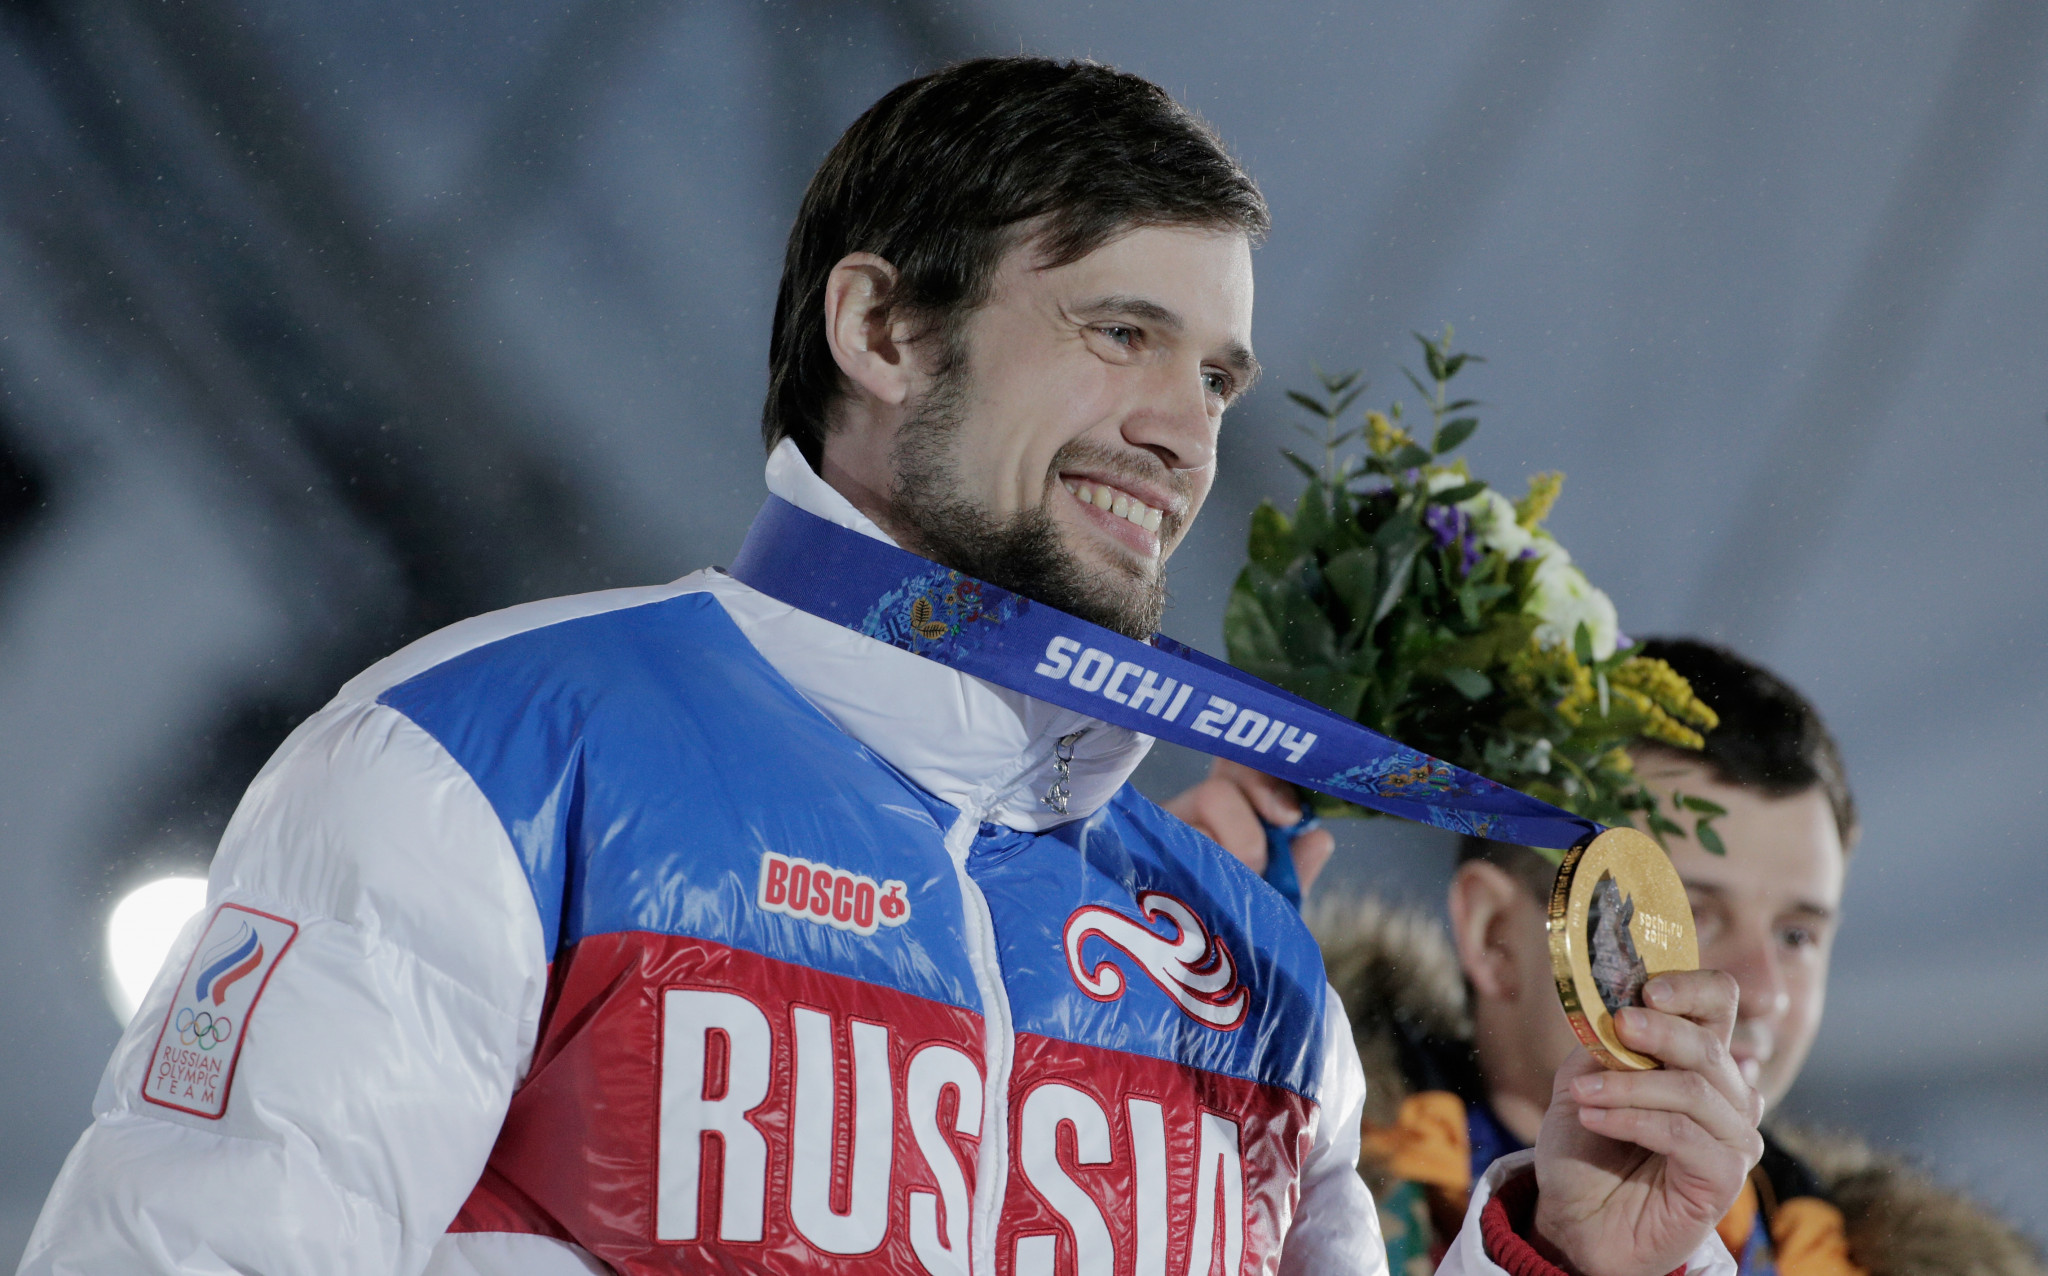 Alexander Tretiakov has been disqualified and stripped of his men's skeleton gold medal at Sochi 2014 ©Getty Images